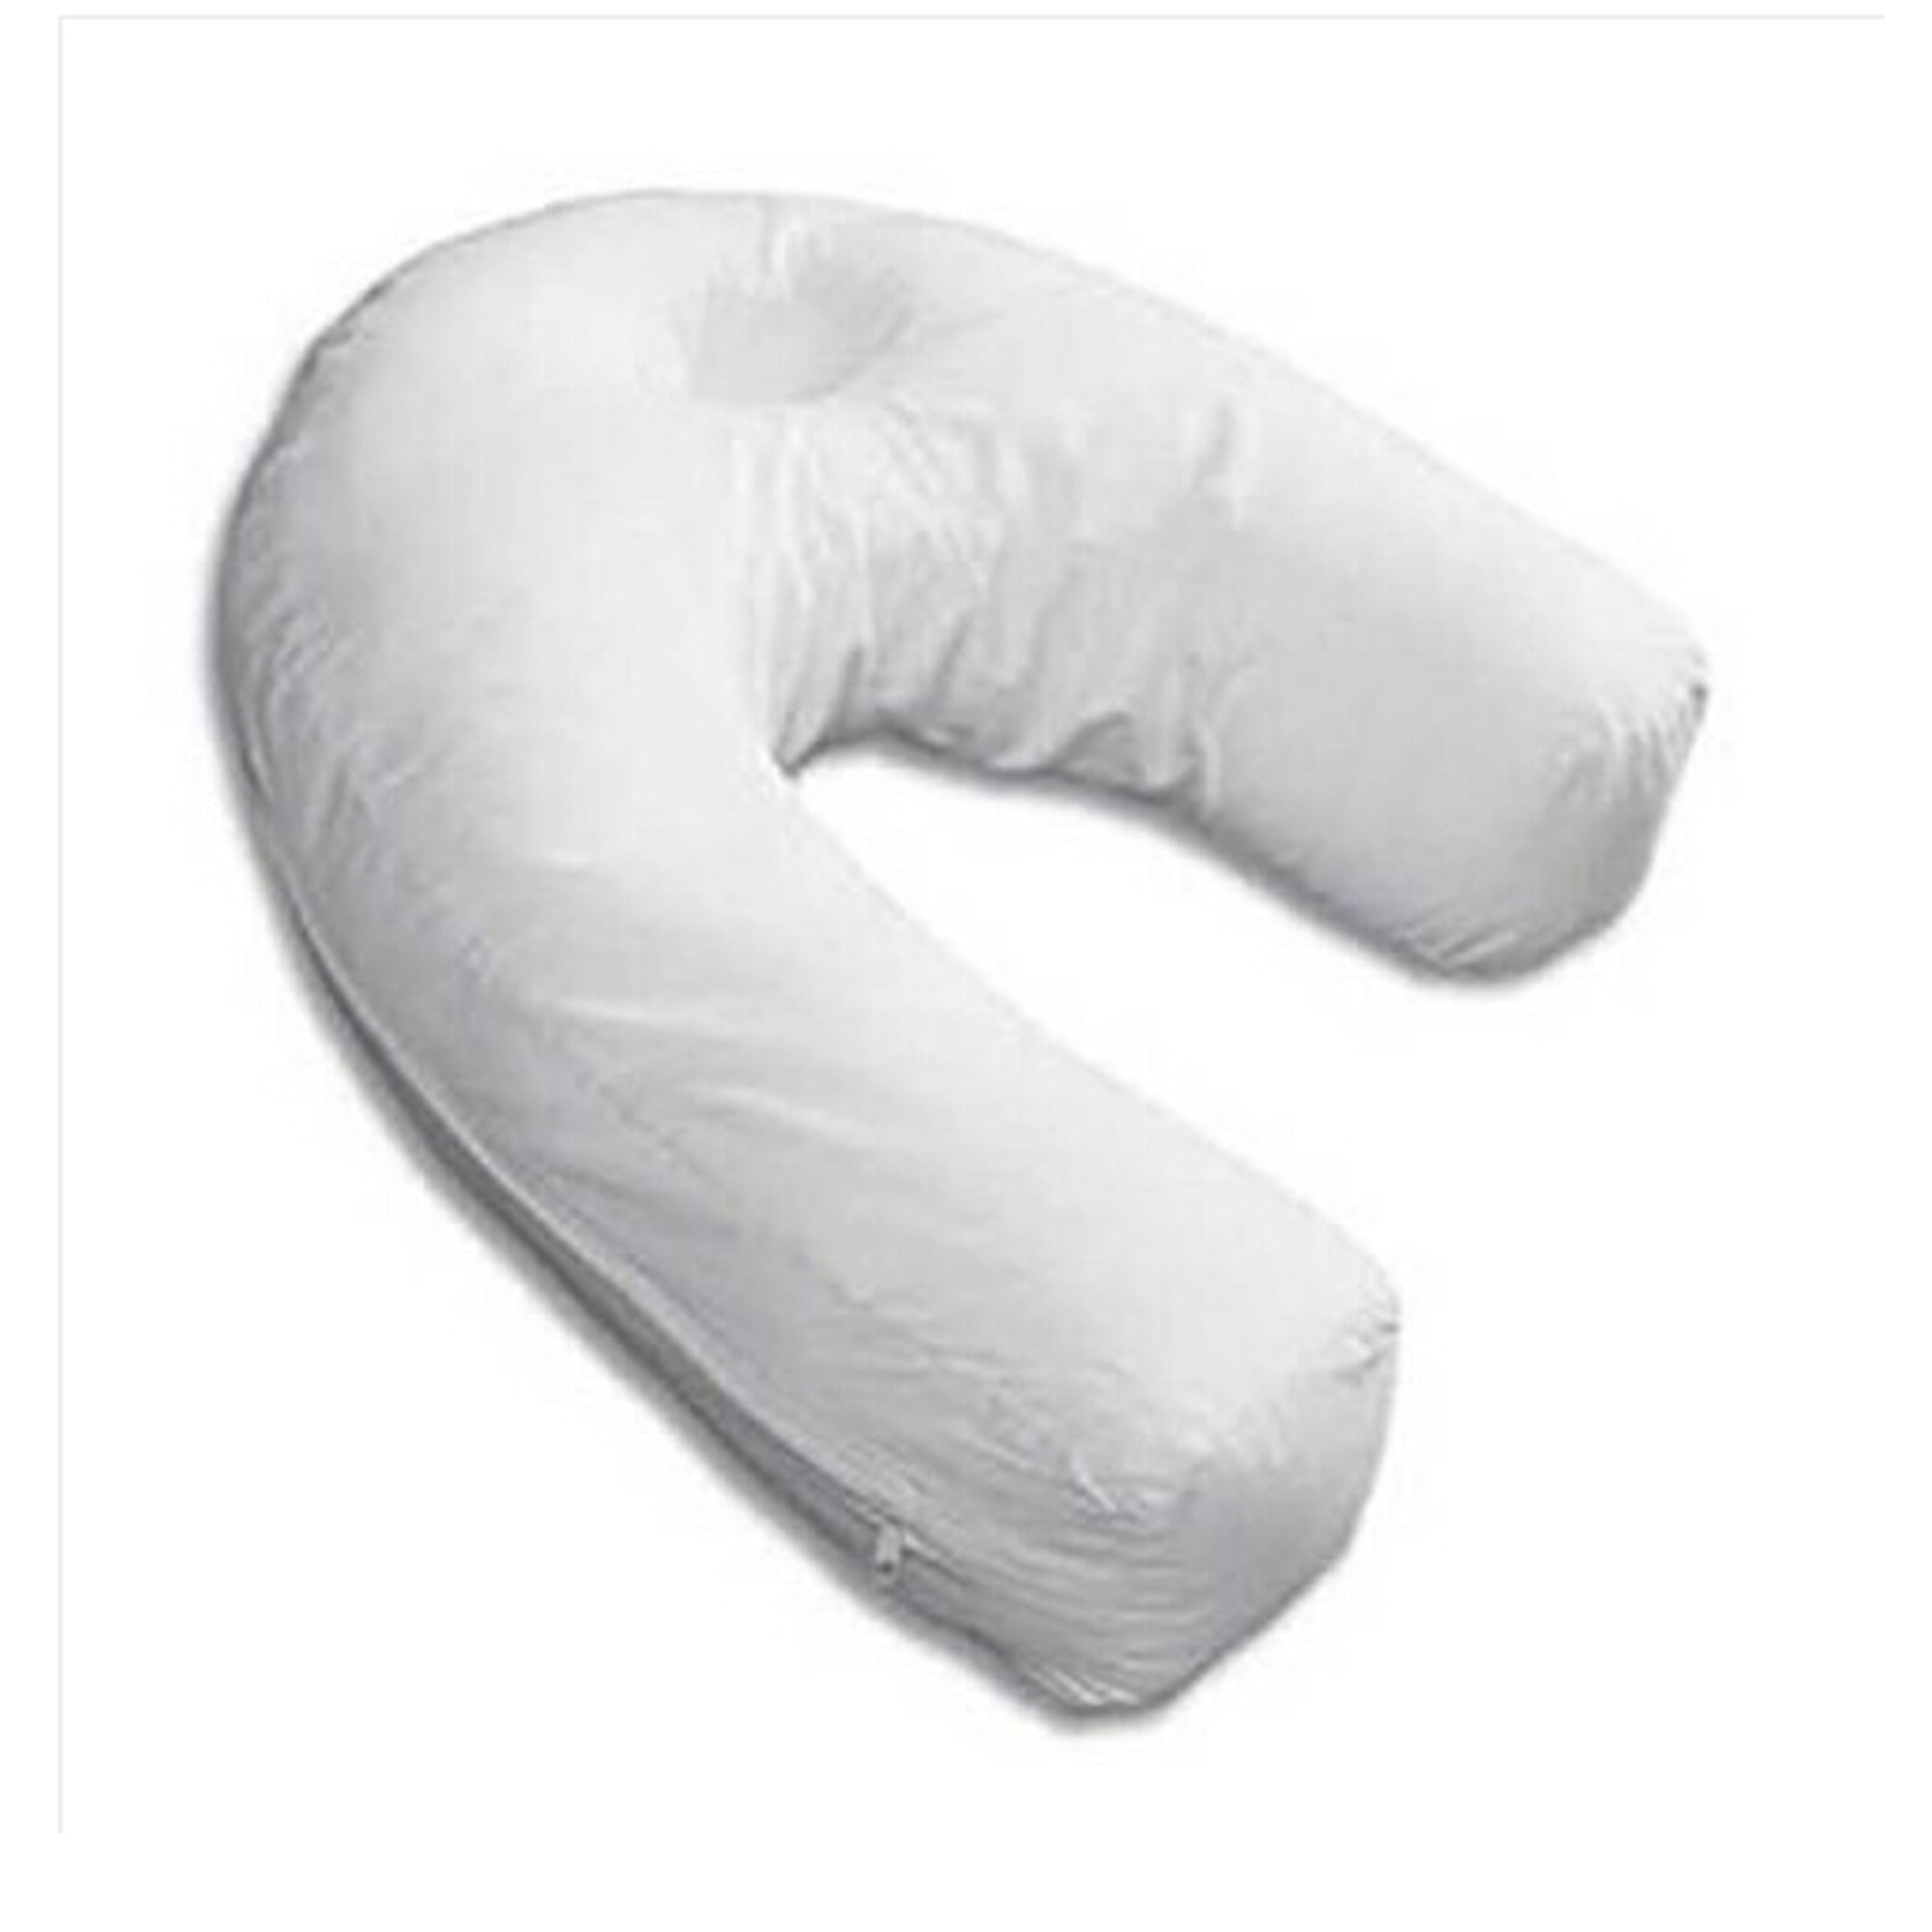 Prof Side Sleeper Pro Pillow Therapeutic Sleep Buddy U-shaped Pillow for Health 